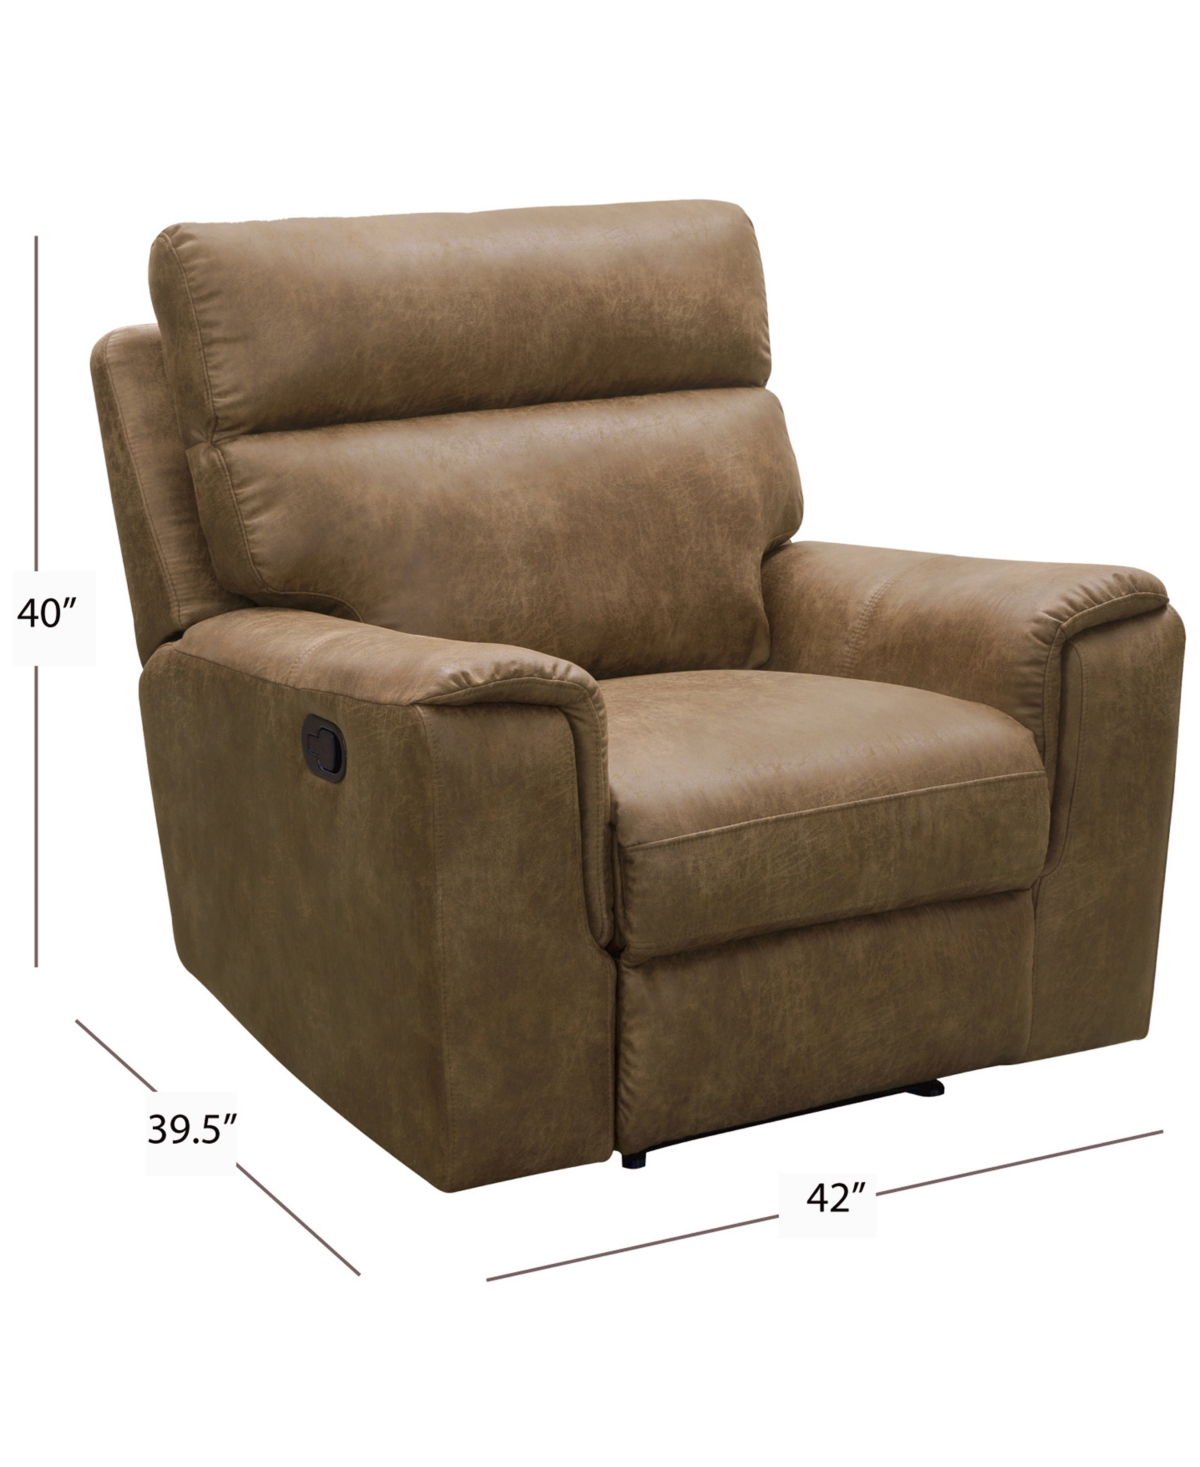 Shop Abbyson Living Lawrence 39.5" Fabric Recliner In Camel